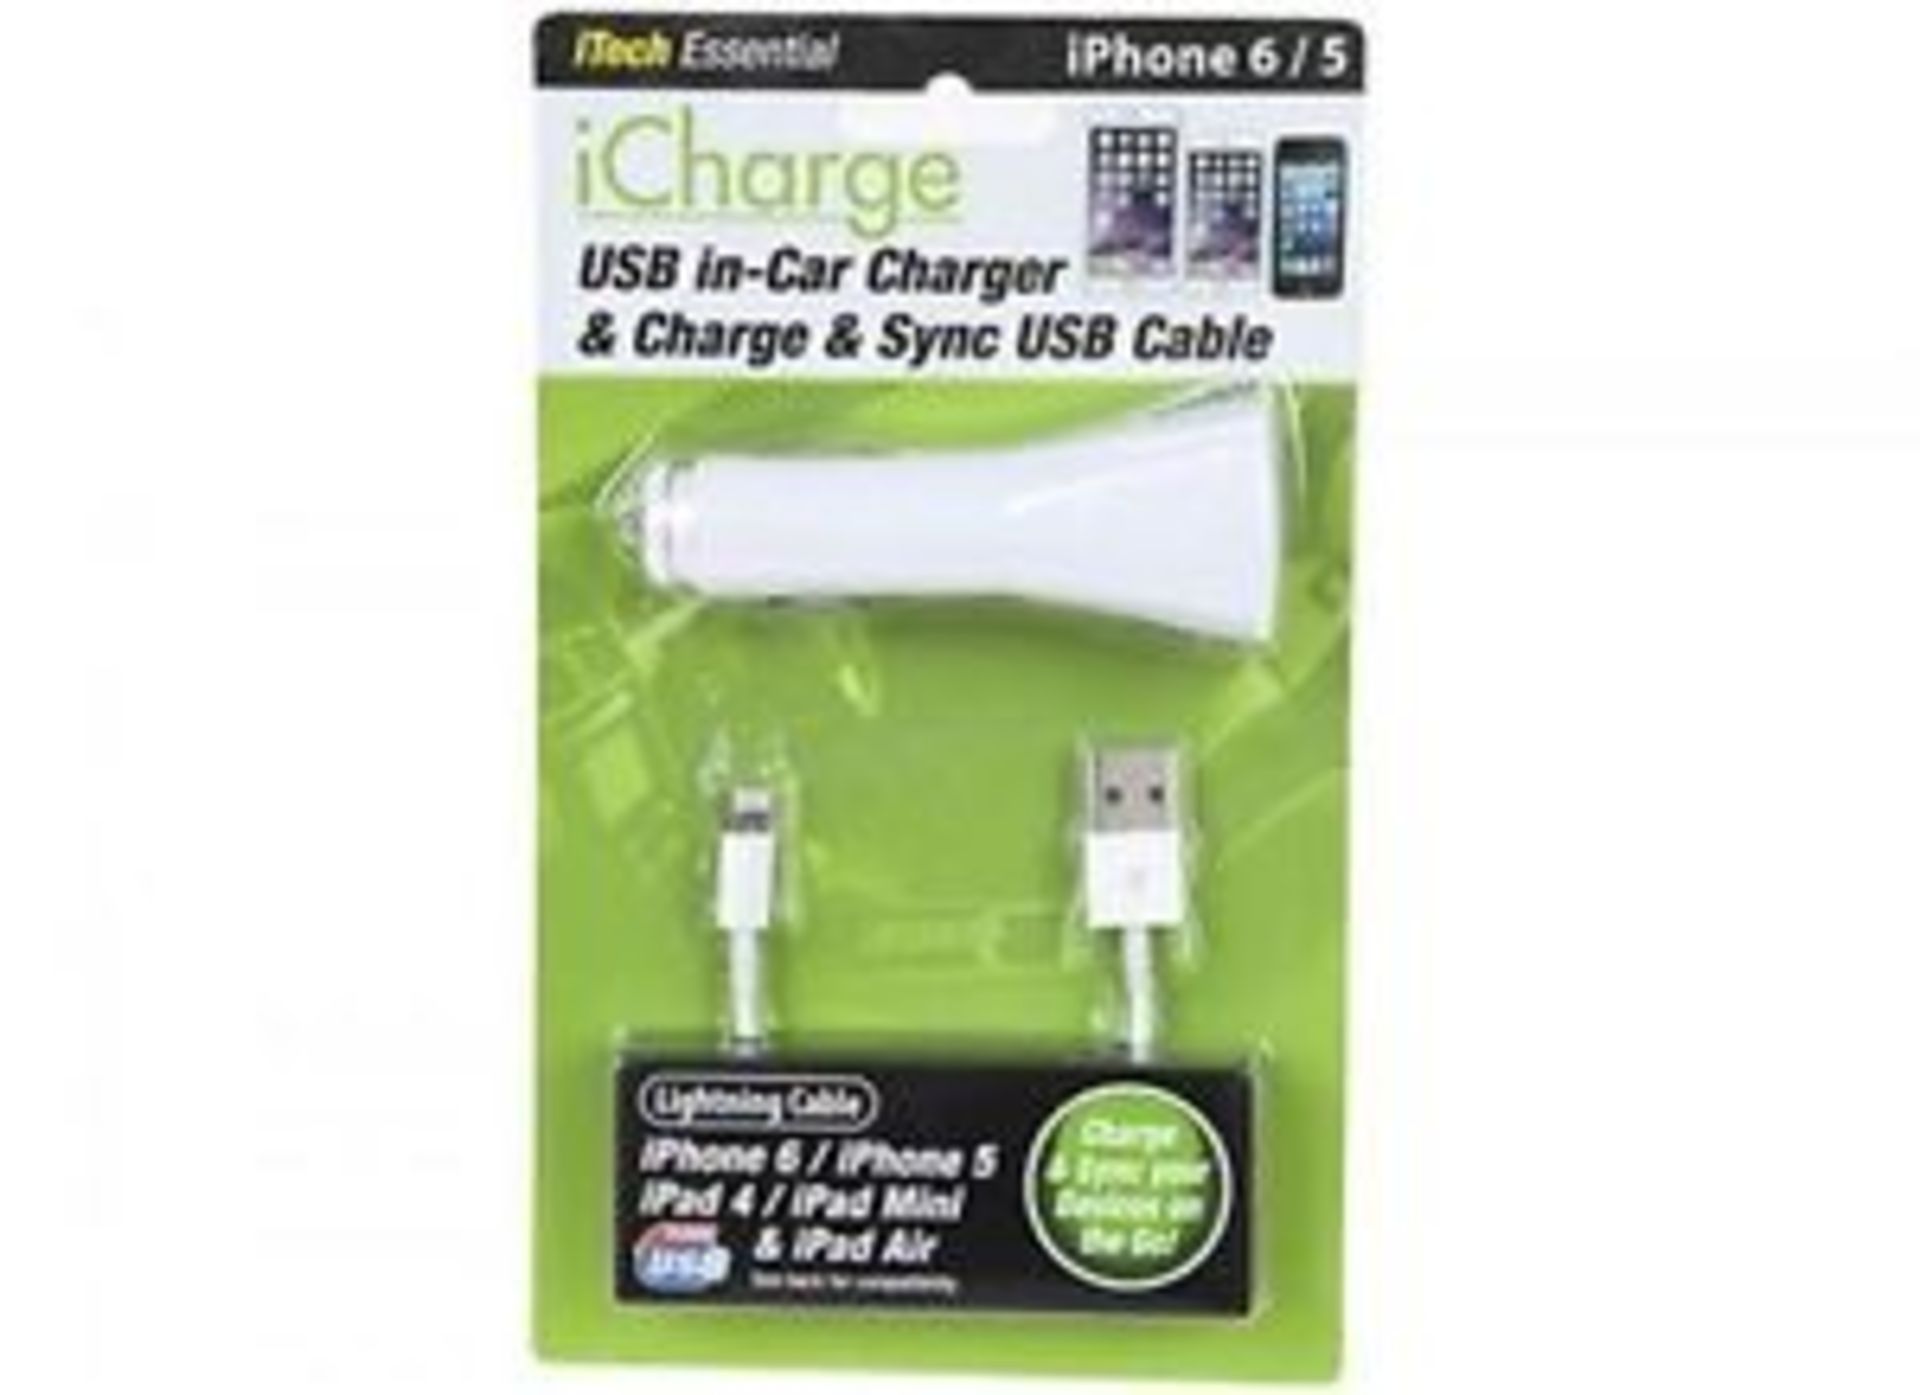 V Grade A USB In car charger with lightening cable for iphone 5 and 6 X  2  Bid price to be